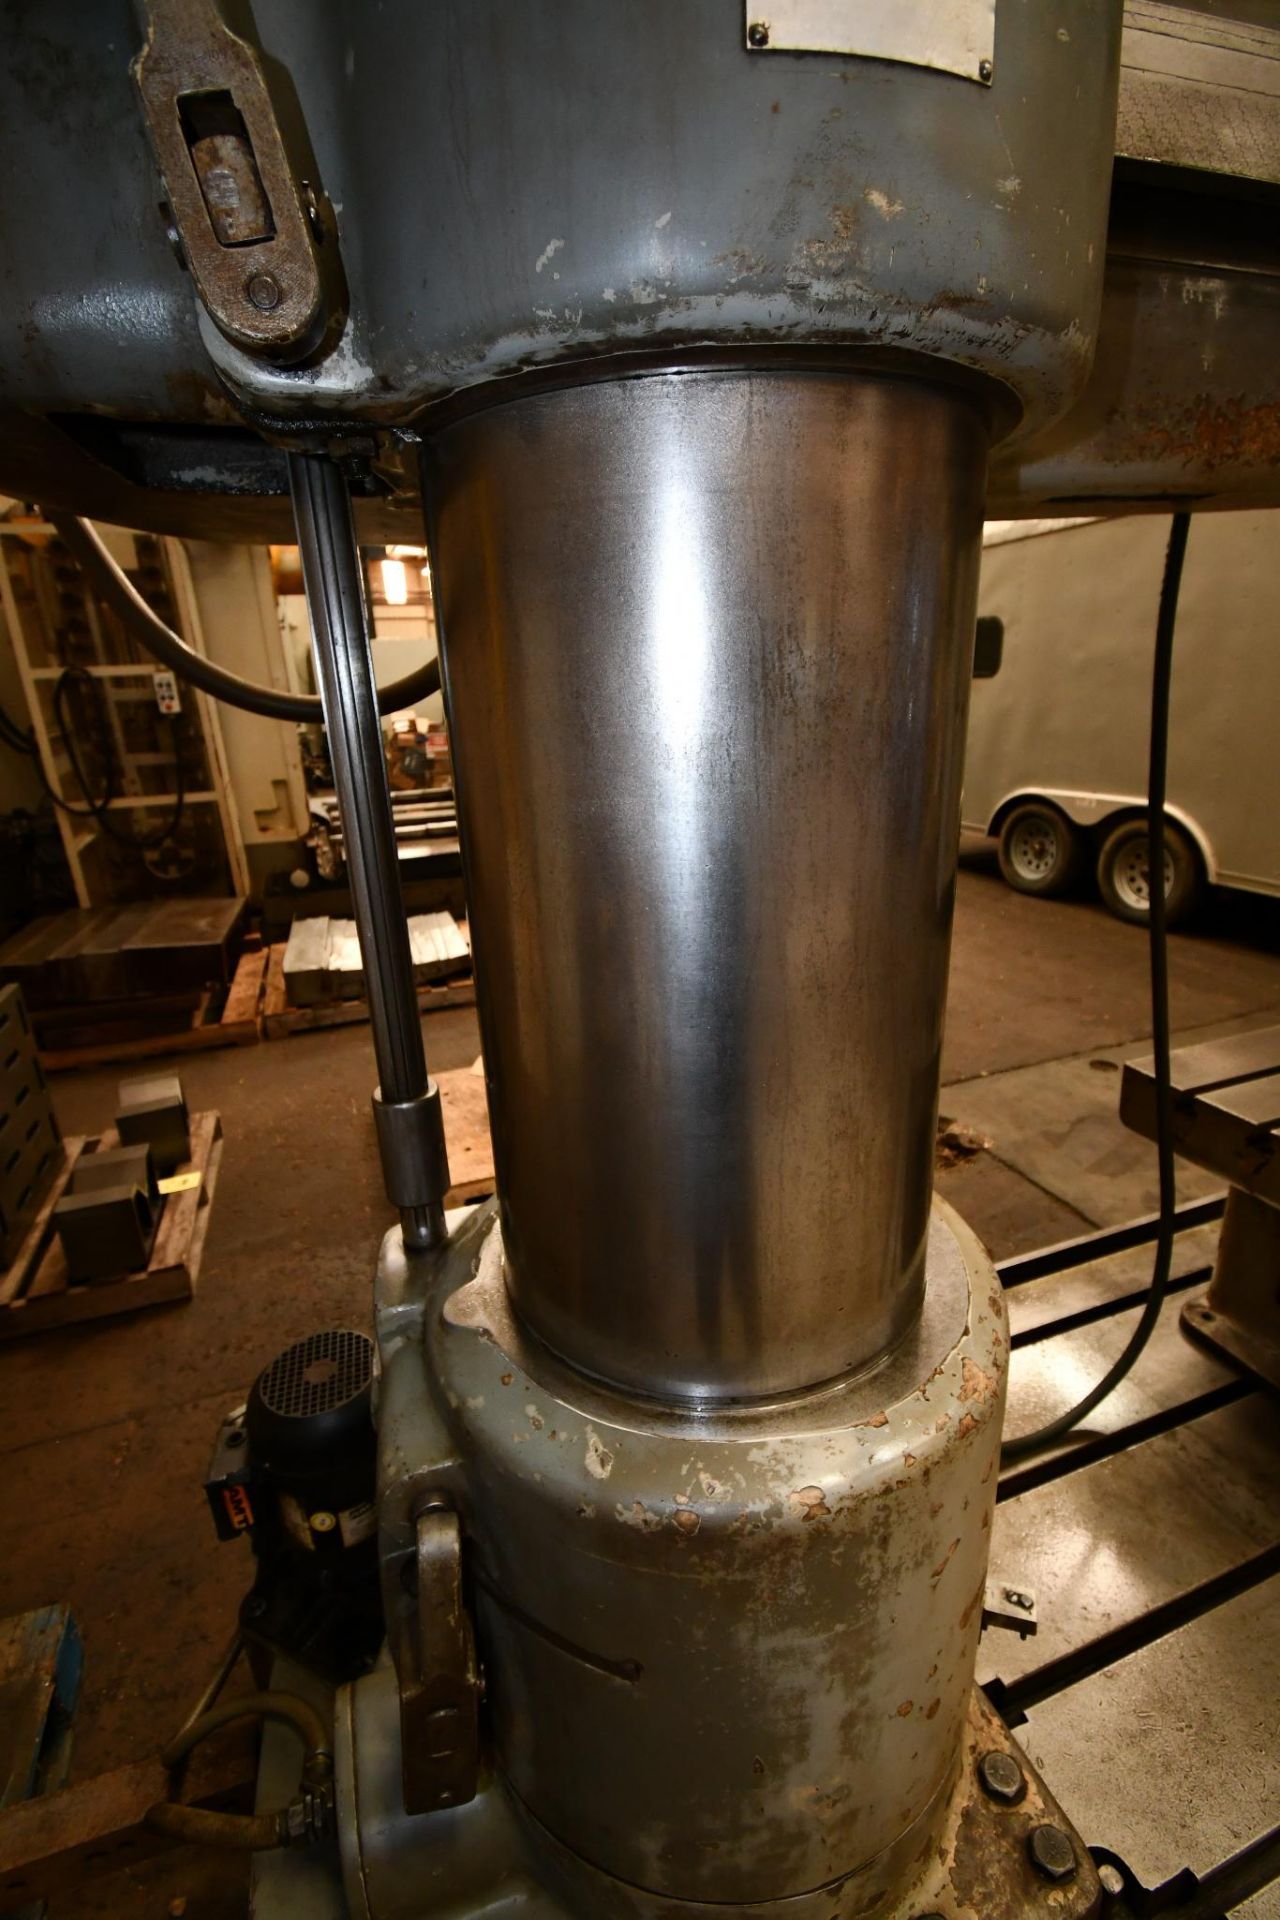 RADIAL ARM DRILL, GIDDINGS & LEWIS BICKFORD CHIPMASTER 6' X 15", pwr. clamp, feed & elevation, box t - Image 2 of 4